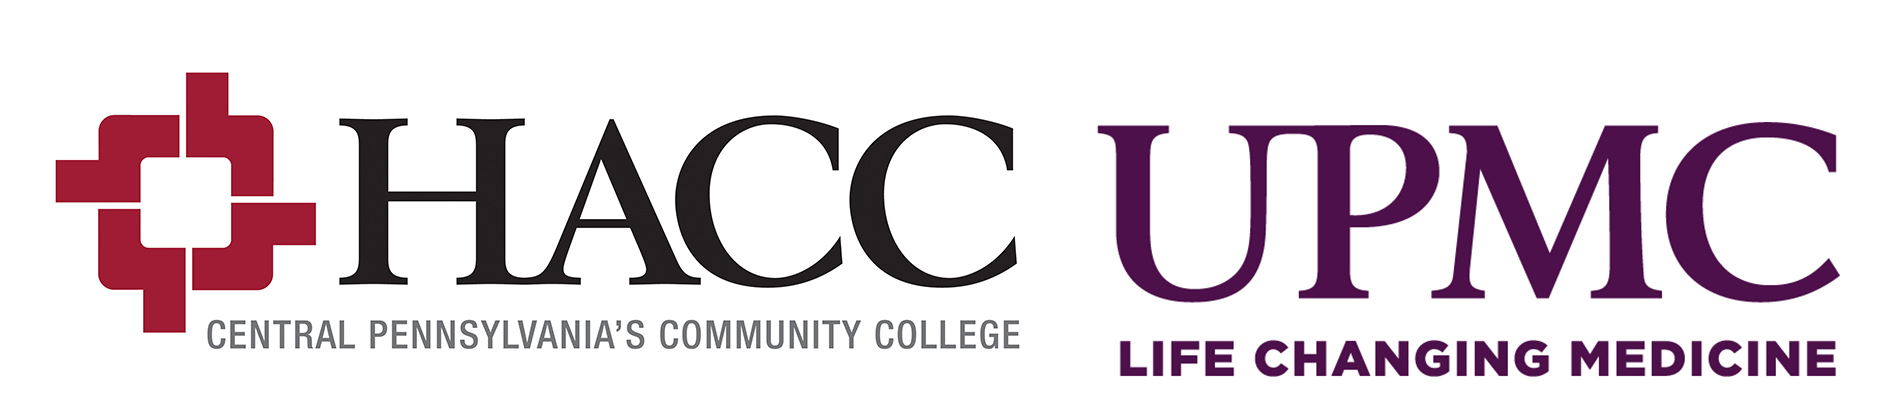 HACC and UPMC logos